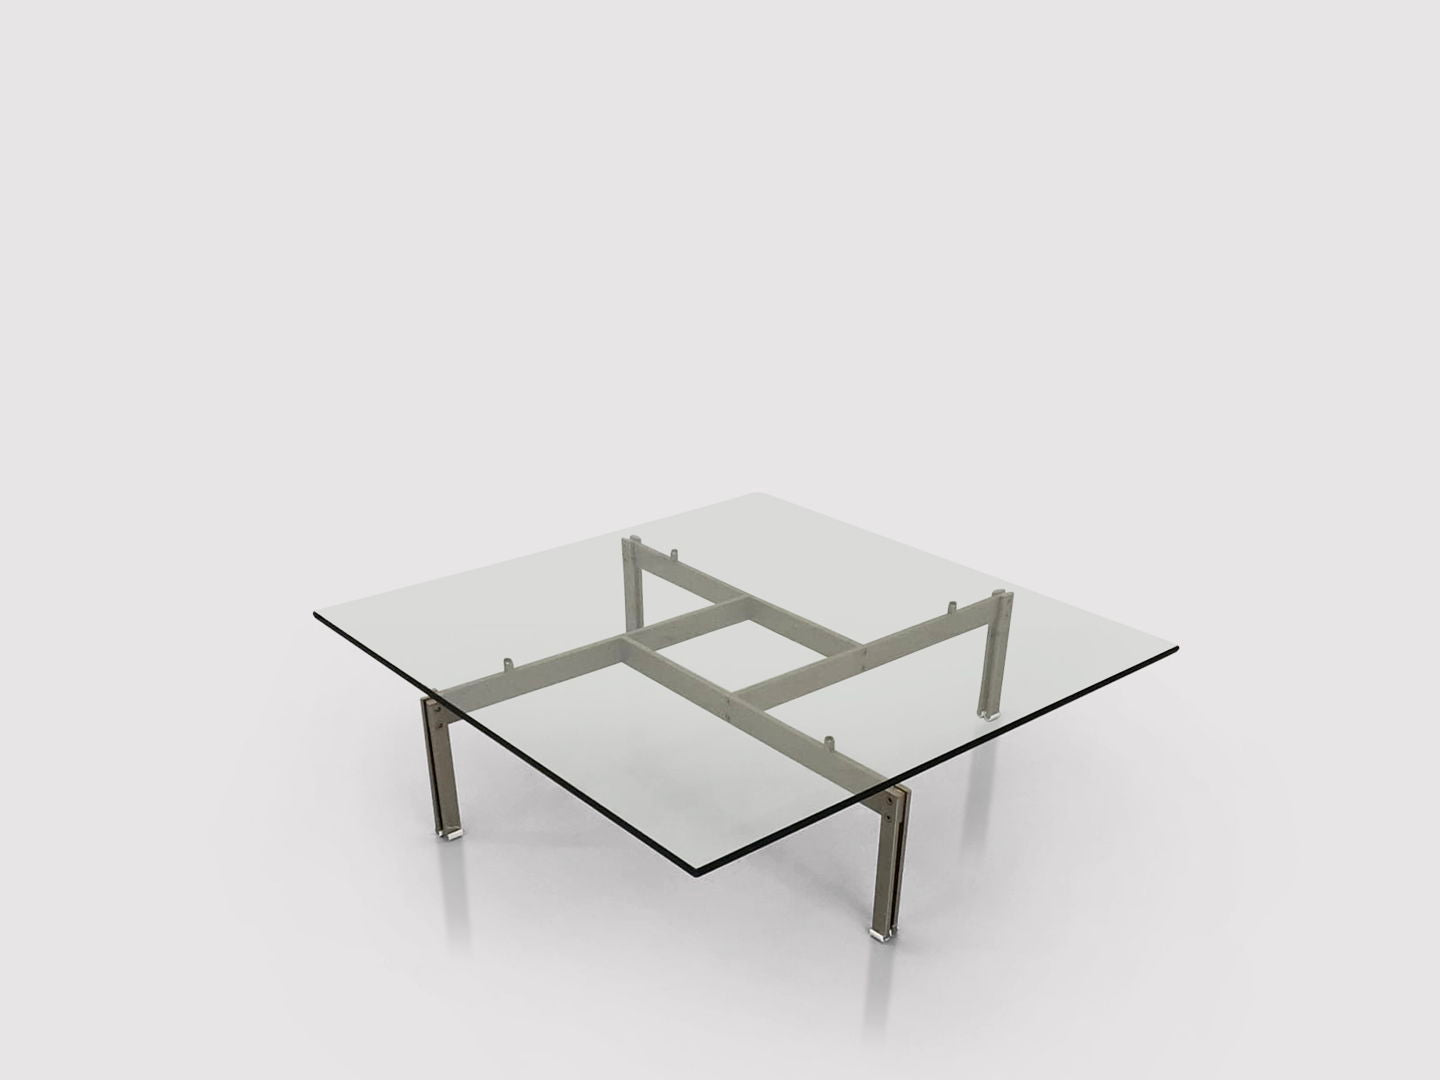 Onda brushed steel and glass coffee table by Giovanni Offredi for Saporiti 1970s